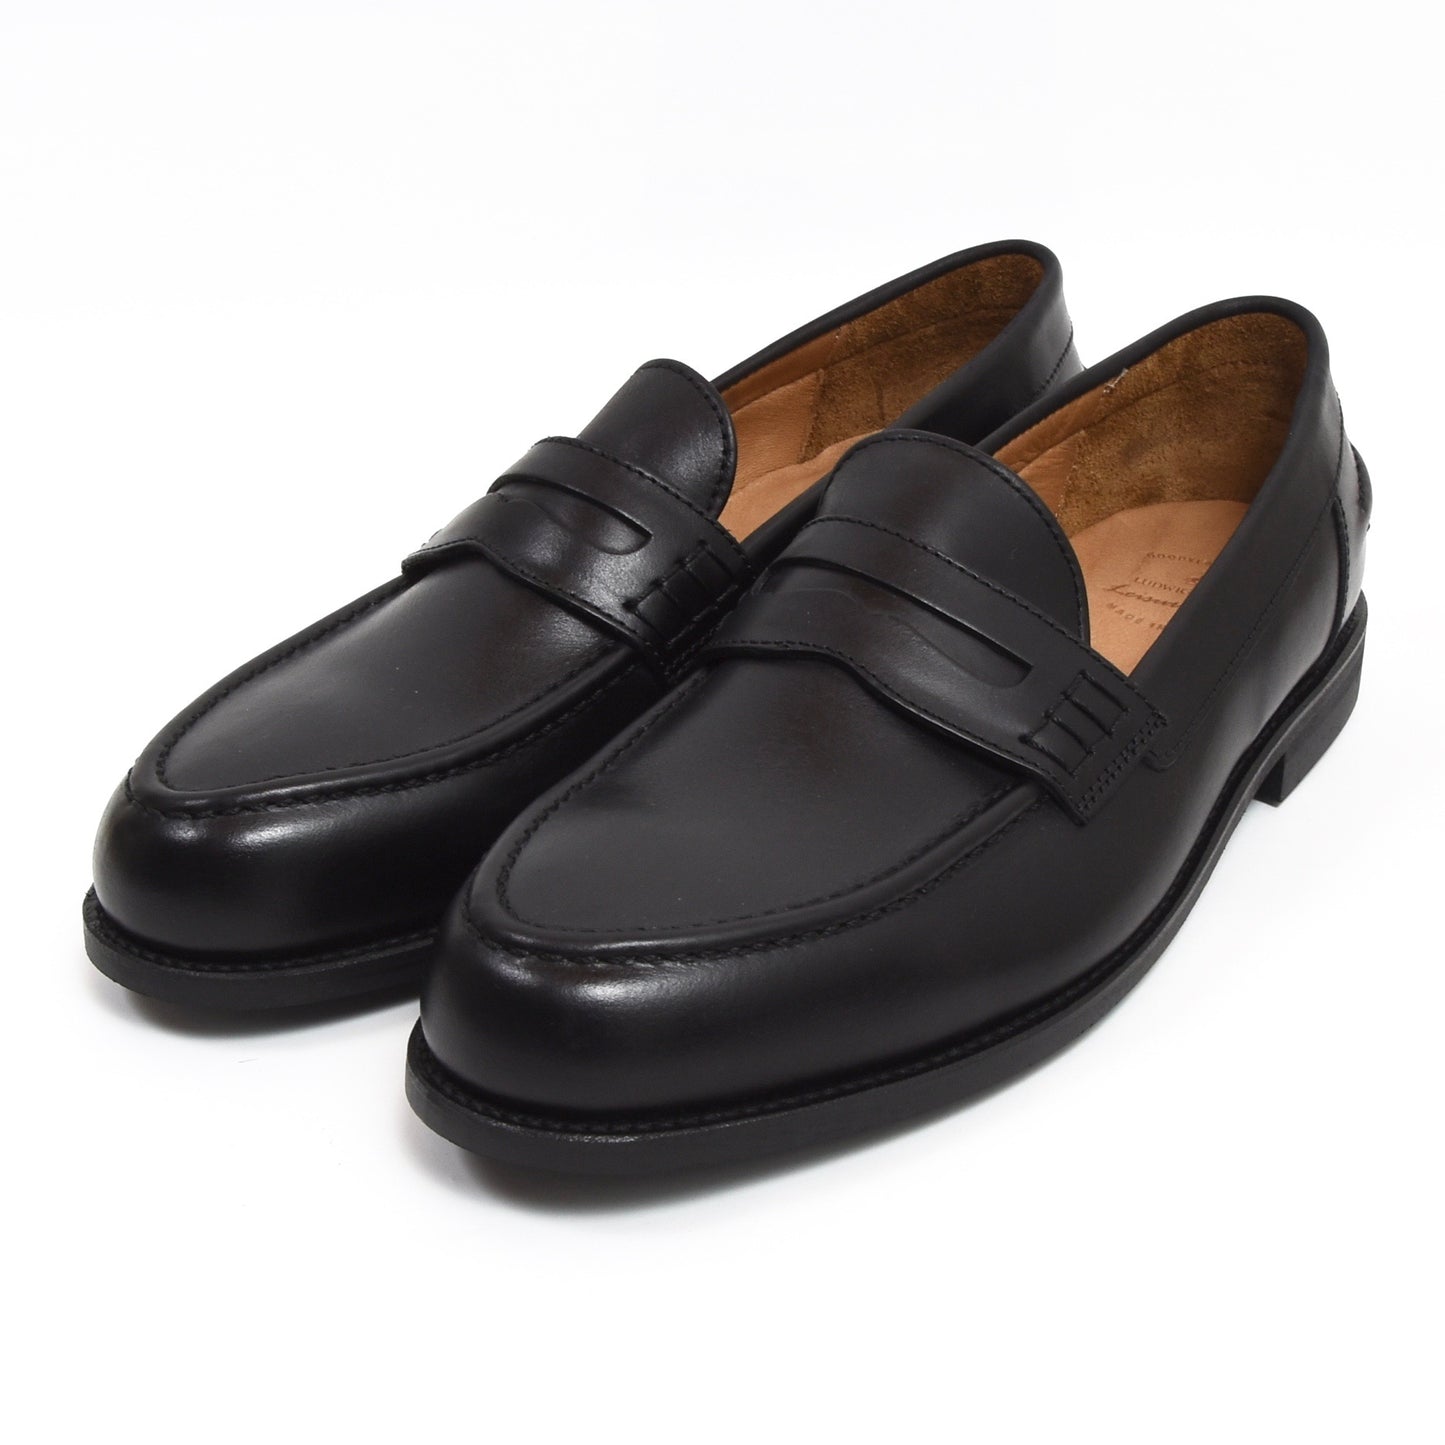 NEW Ludwig Reiter Leisure Class Loafers Size 10.5 - Black